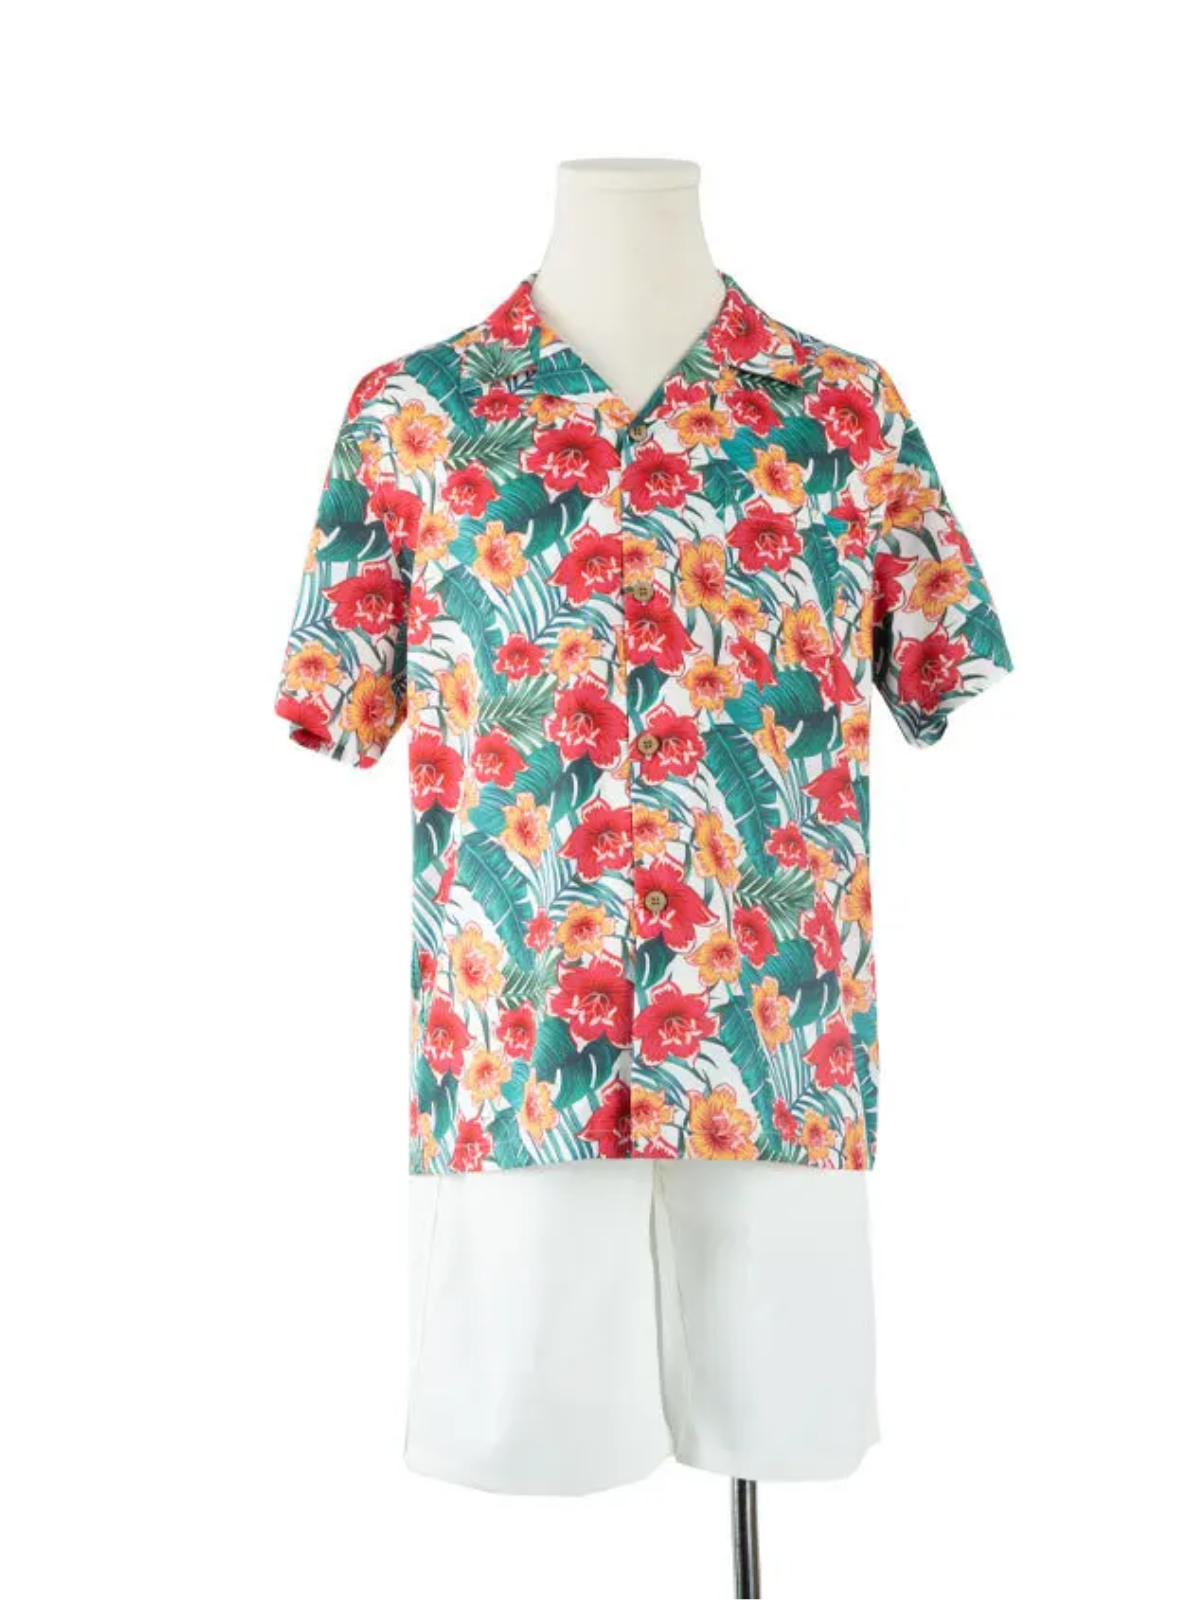 Family Style On Vacay Floral Print Summer Outfit